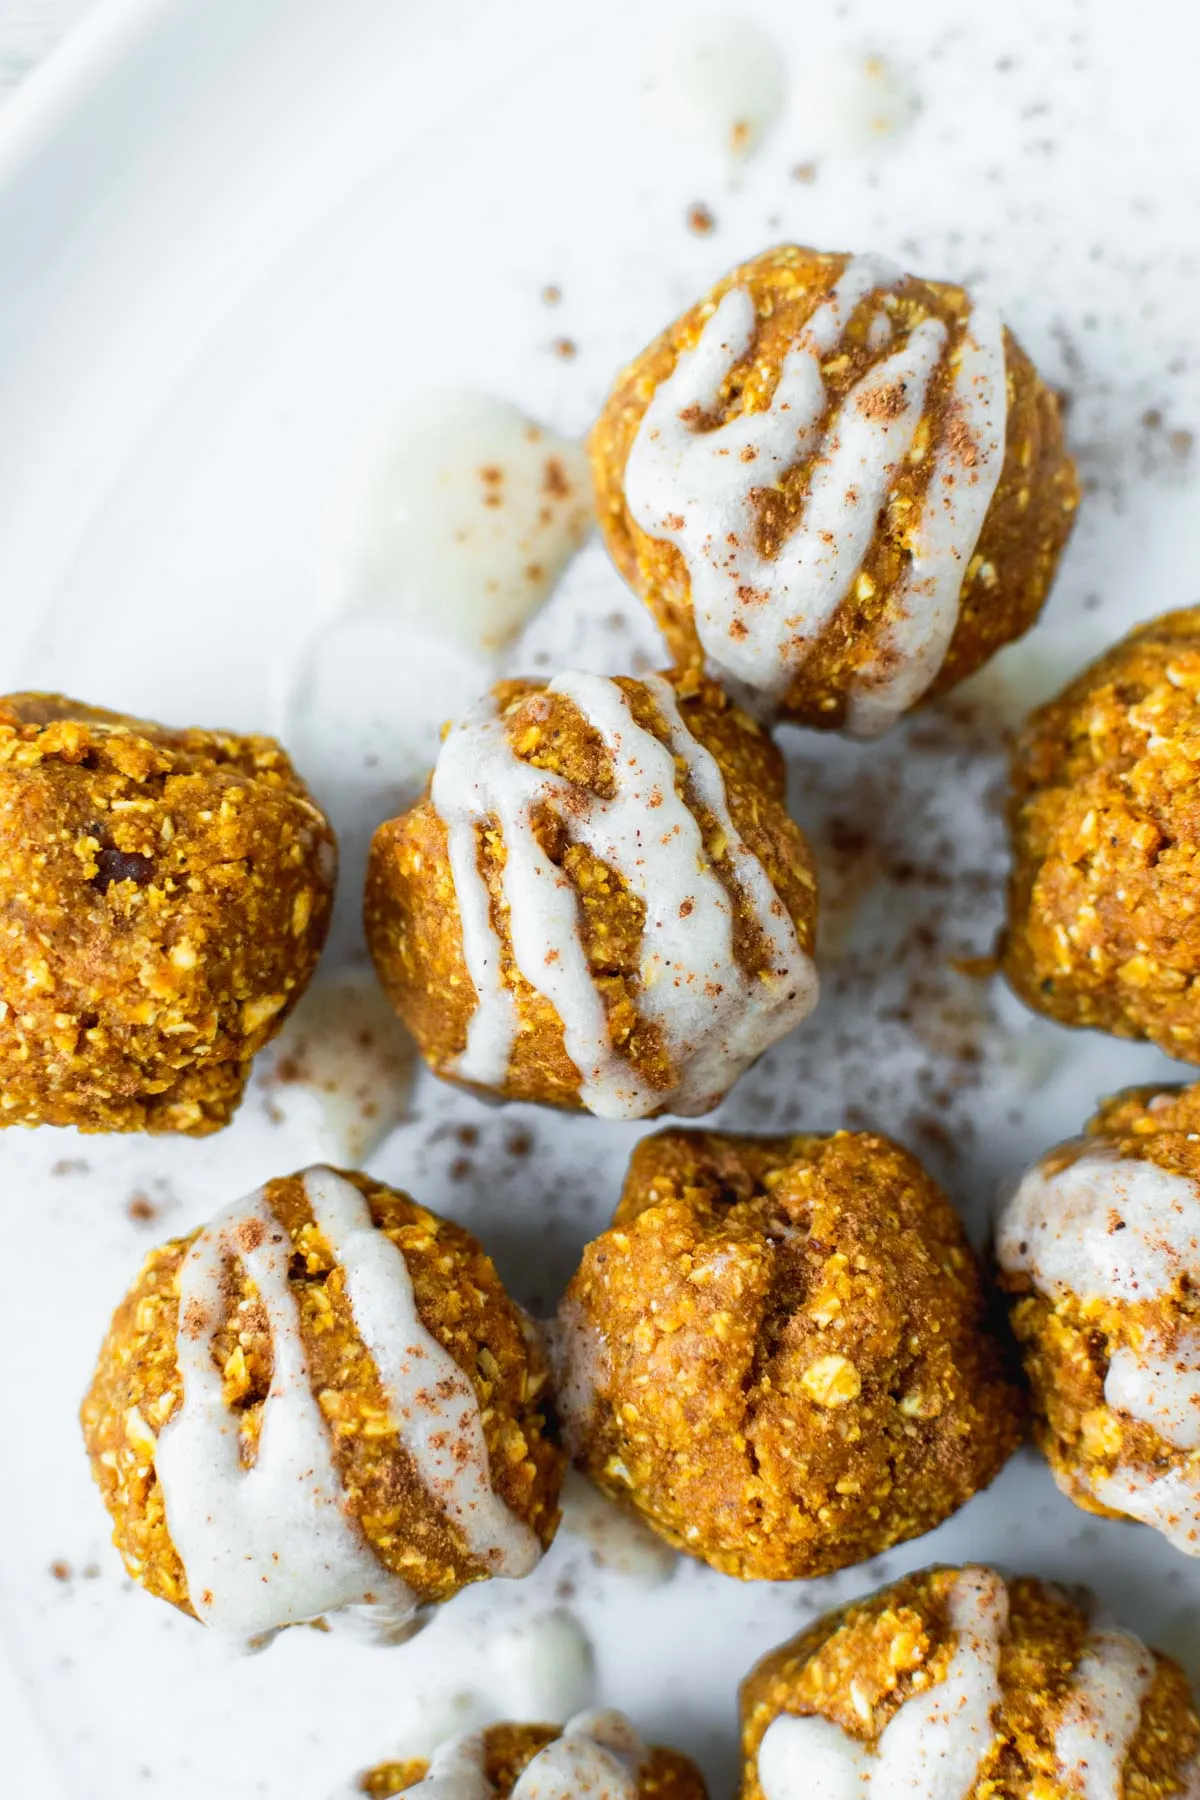 Pumpkin colored energy balls with white icing drizzled on top, siting on a white plate.